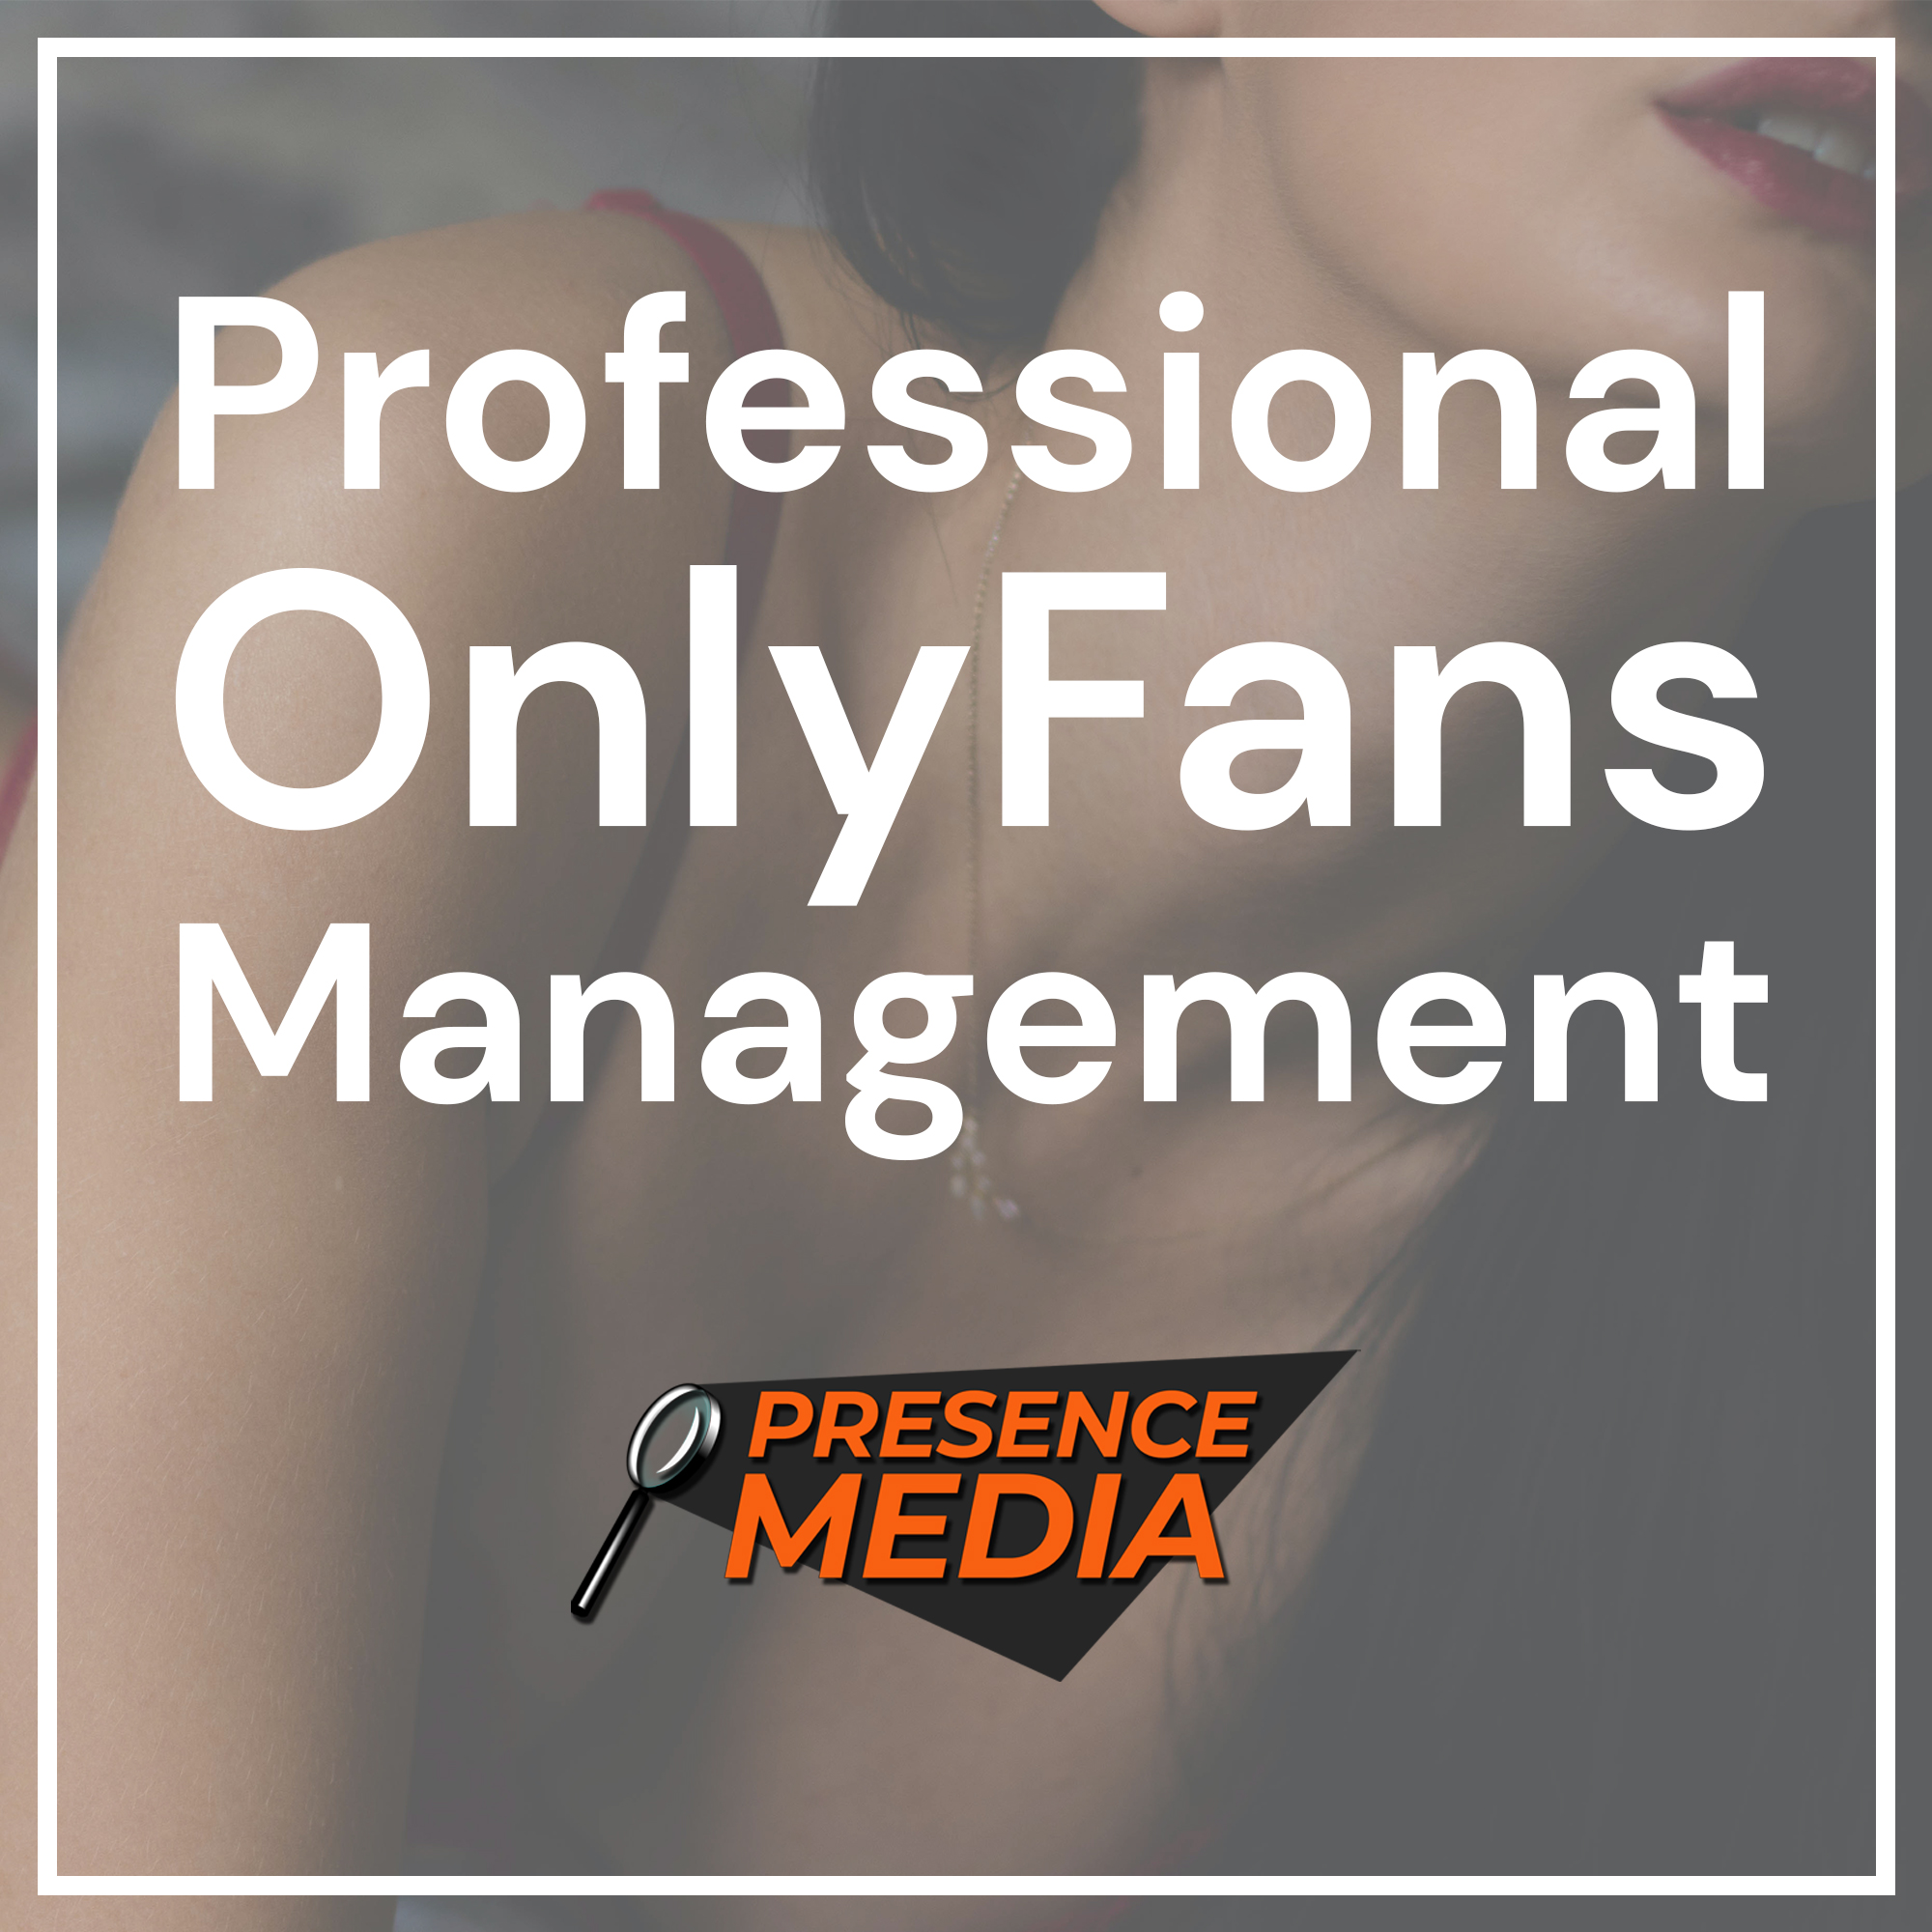 How to be an onlyfans manager